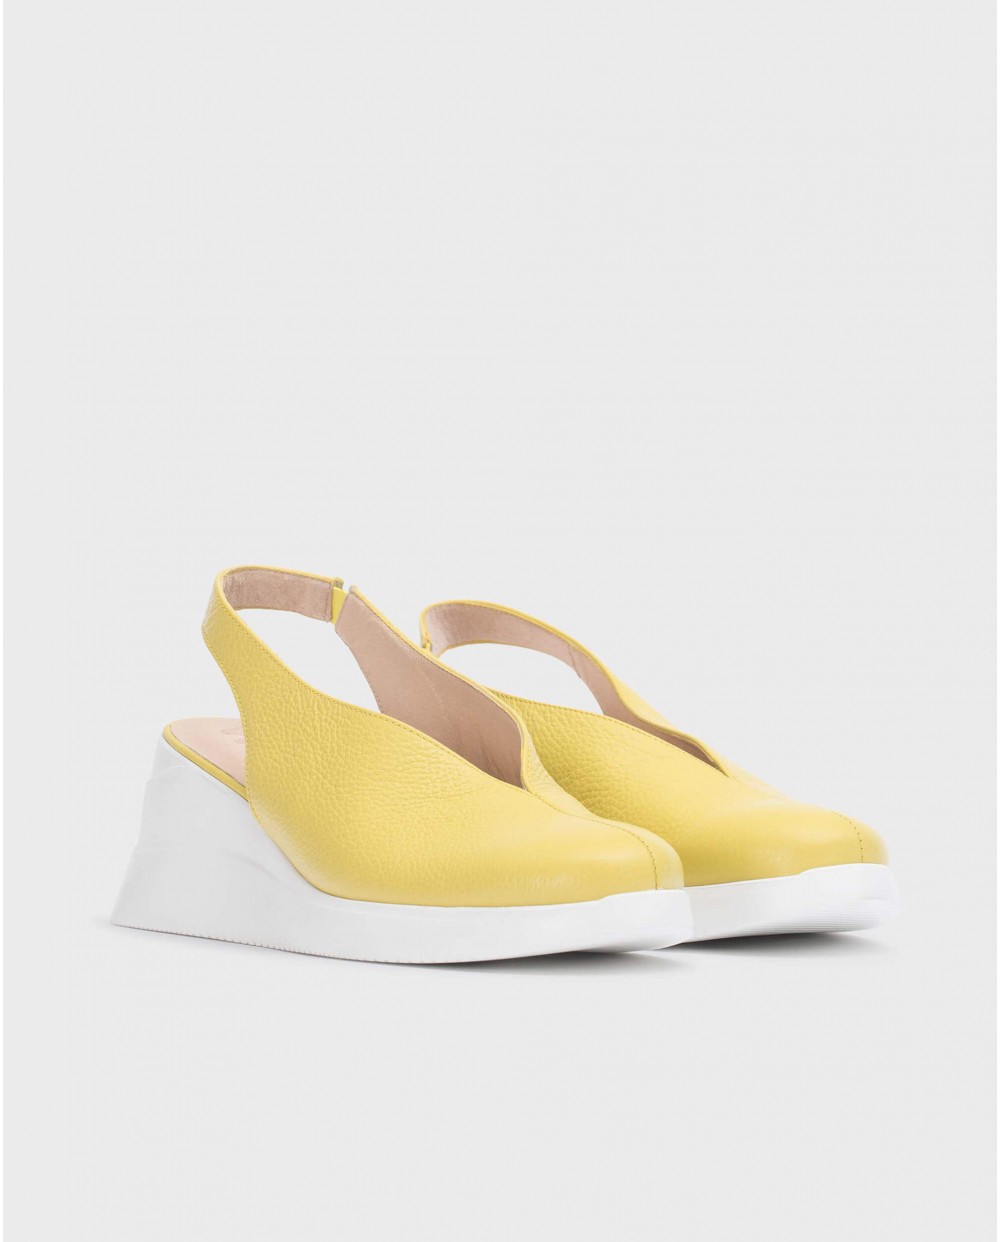 Lime green Walter wedge shoe